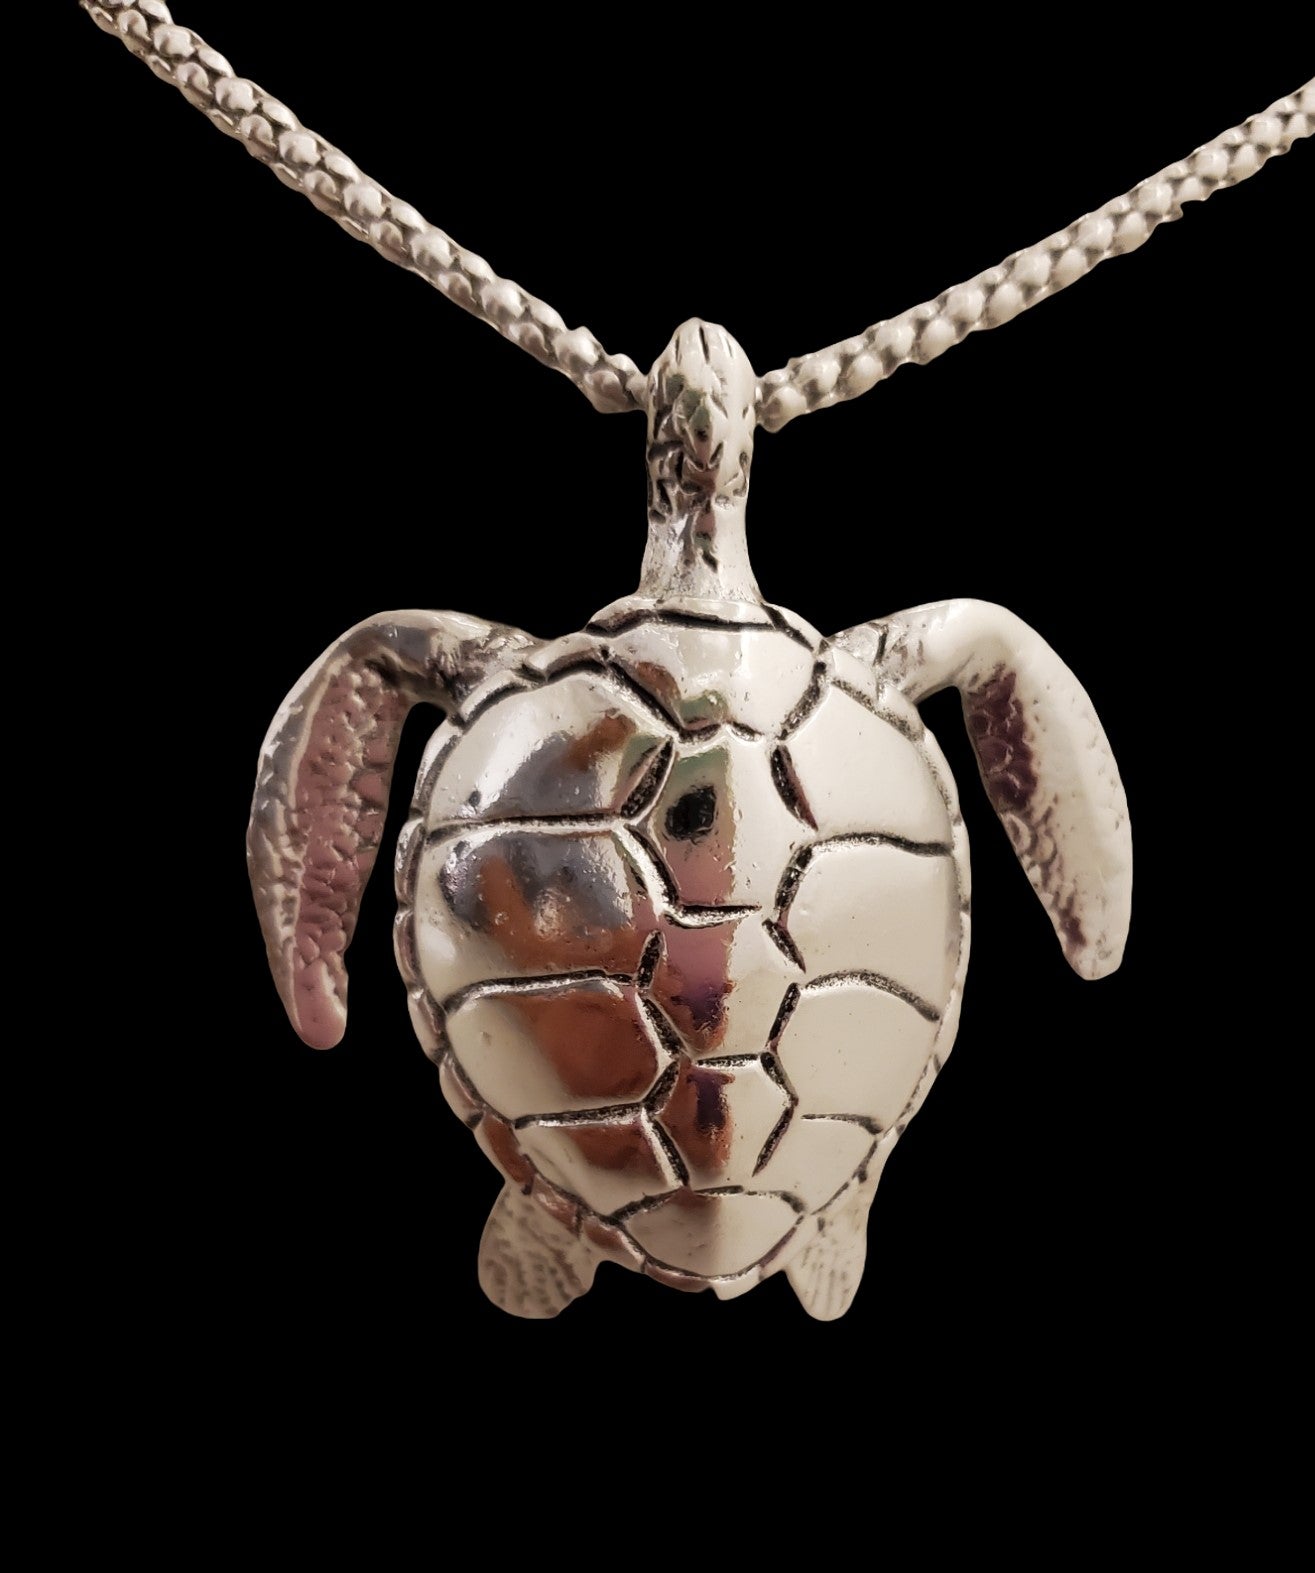 Stainless Streel Turtle Pendant w/Chain-Silver Color-52x46mm-New1022